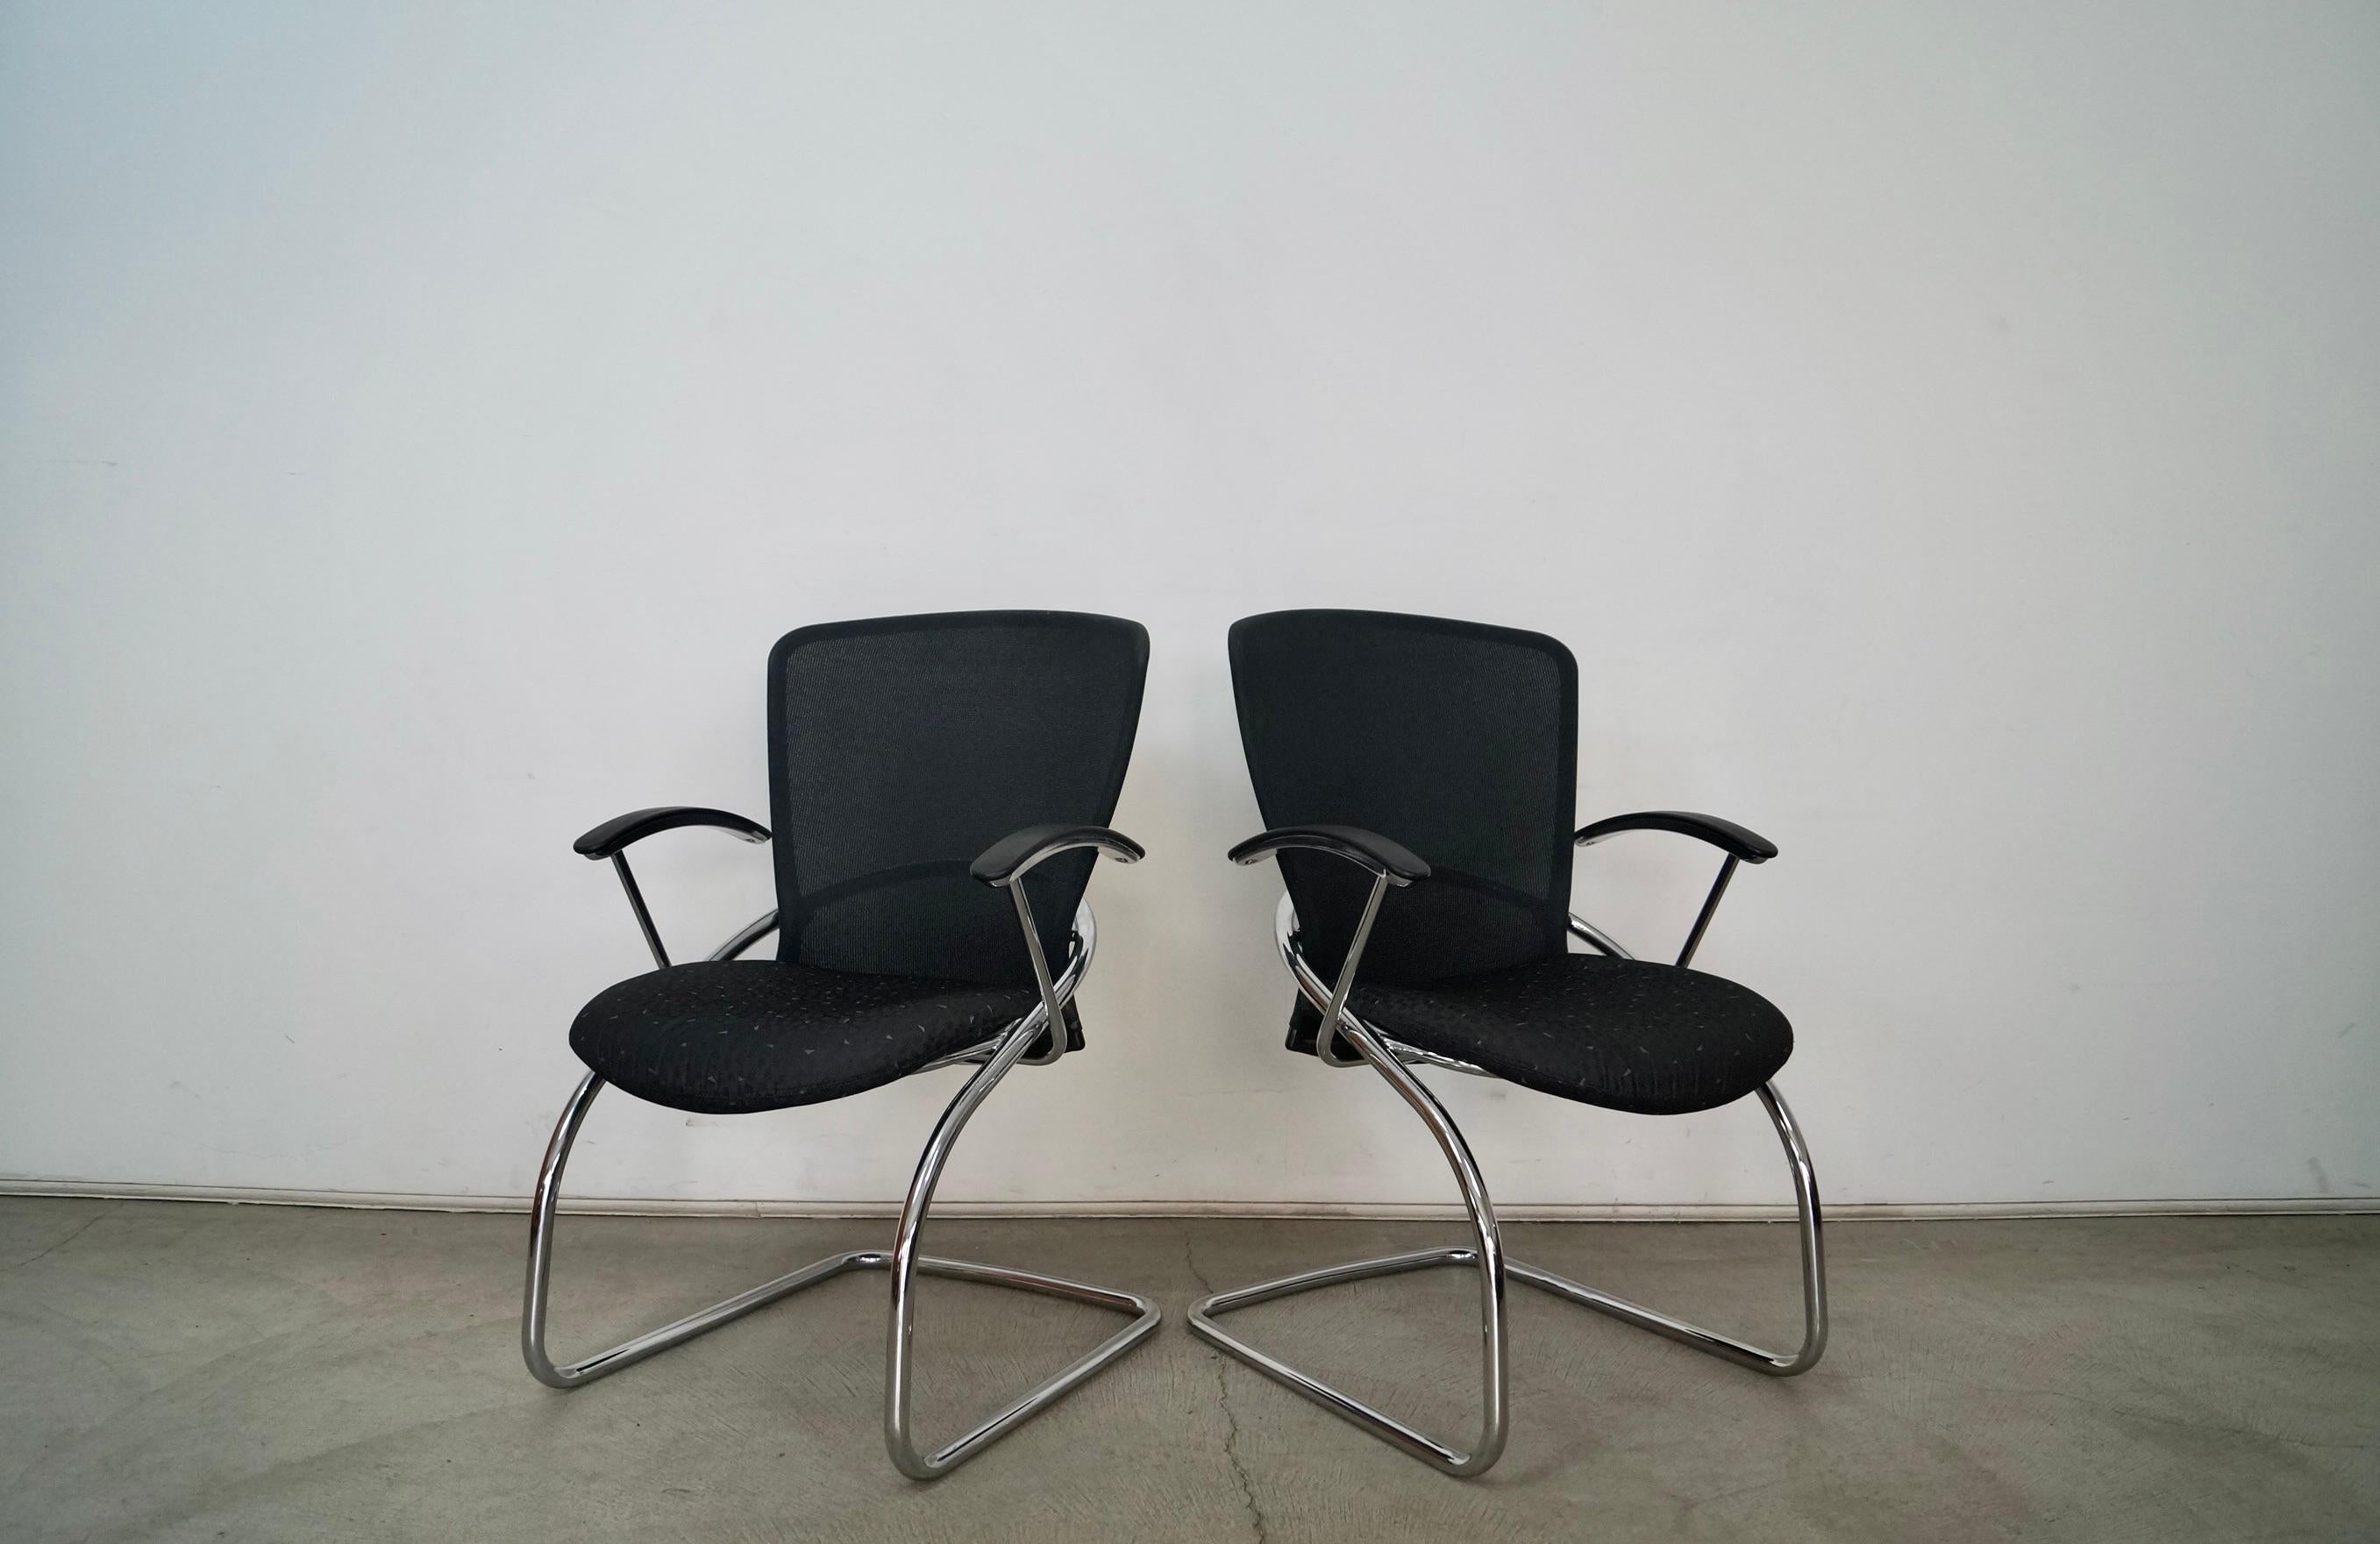 Post-Modern 1990's Postmodern German Chrome Cantilever Arm Chairs - A Pair For Sale